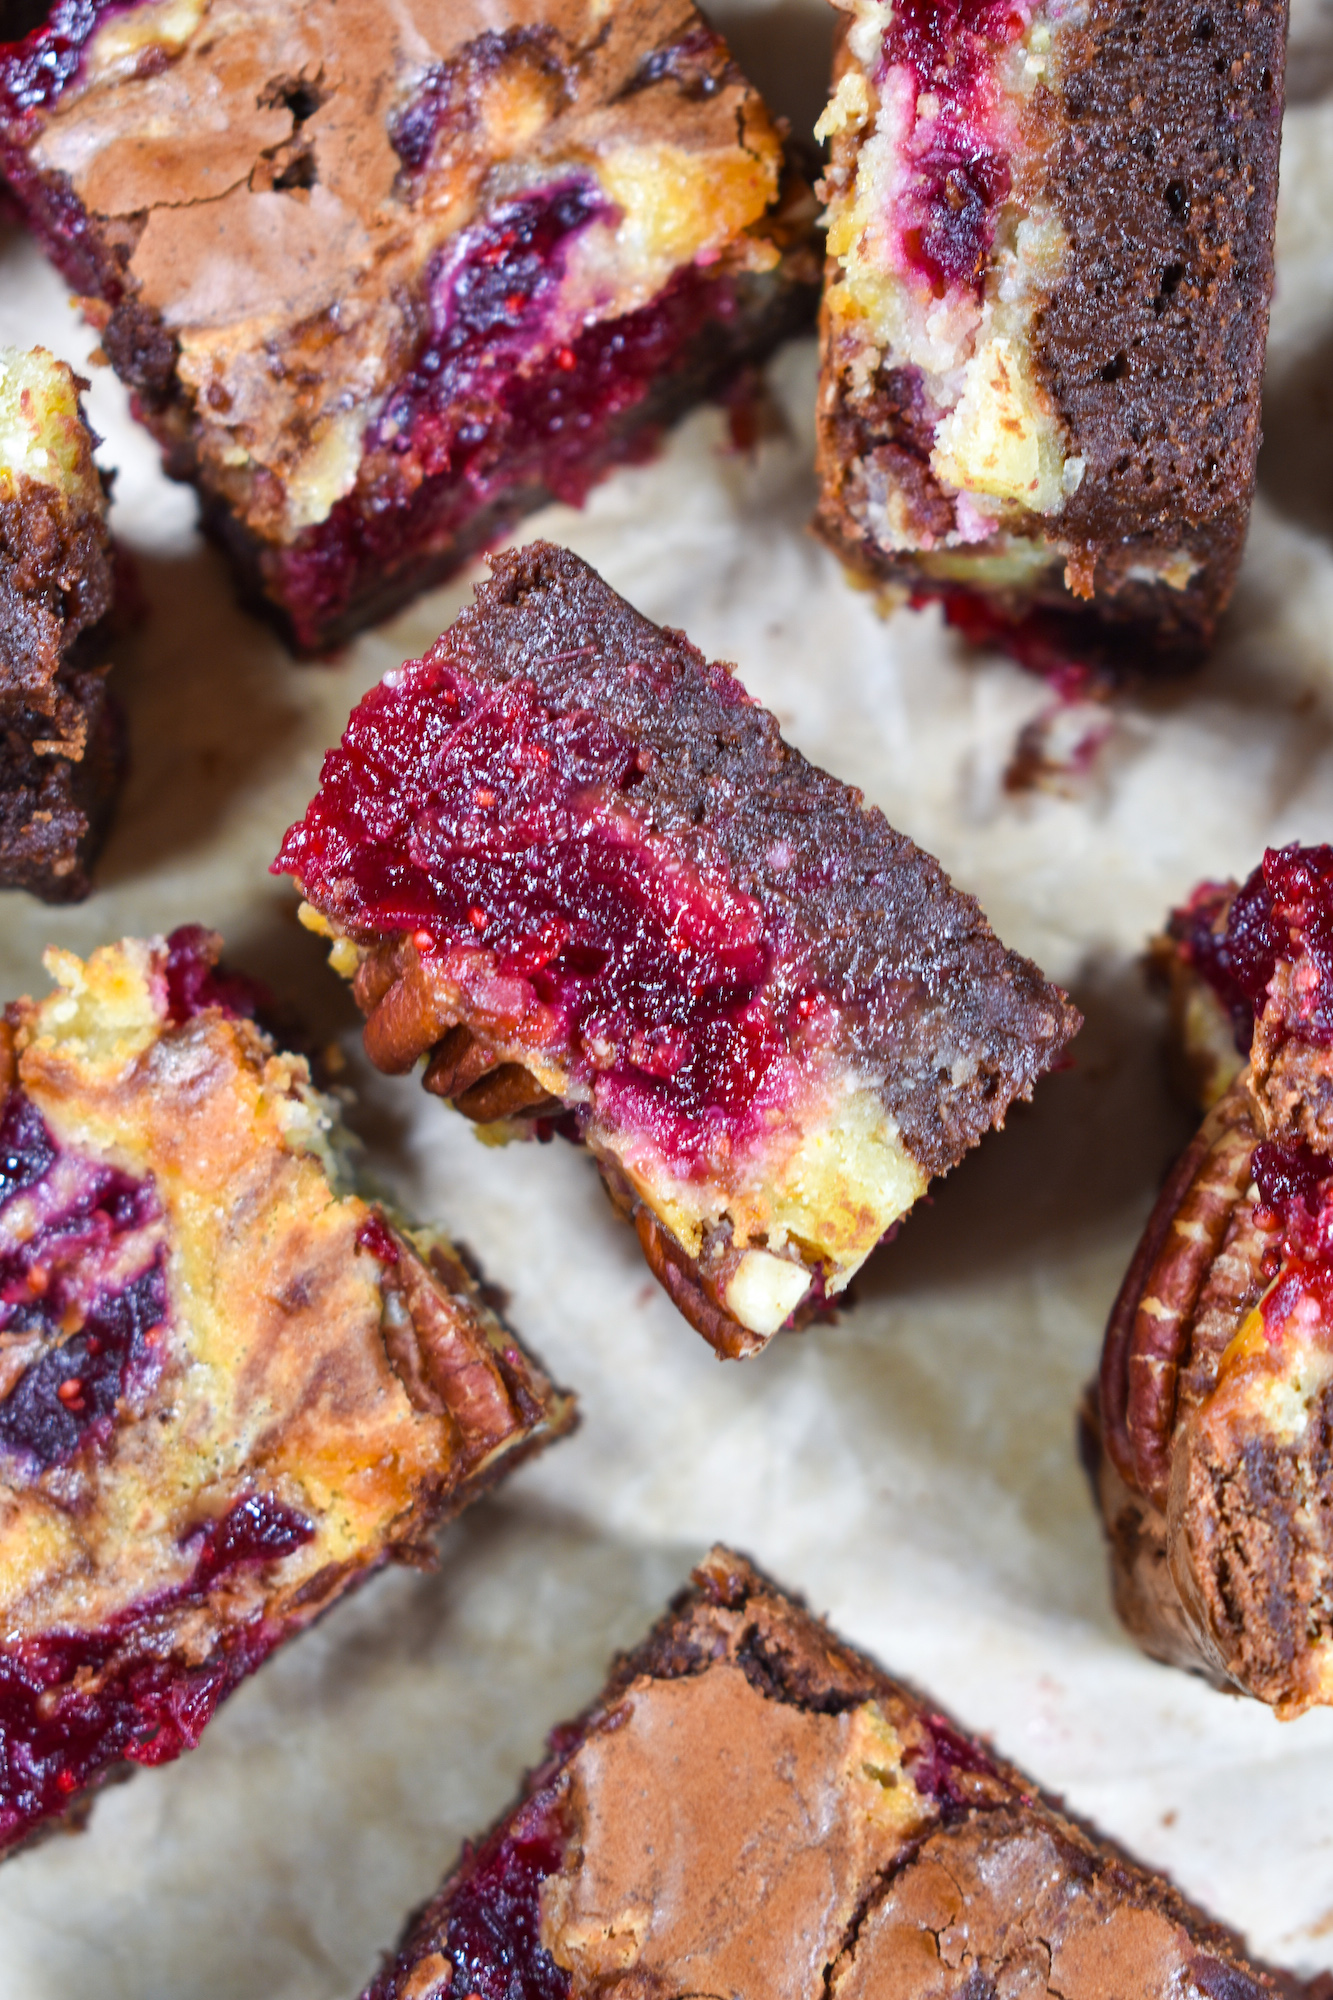 brie and cranberry brownies arranged on a sheet of baking parchment